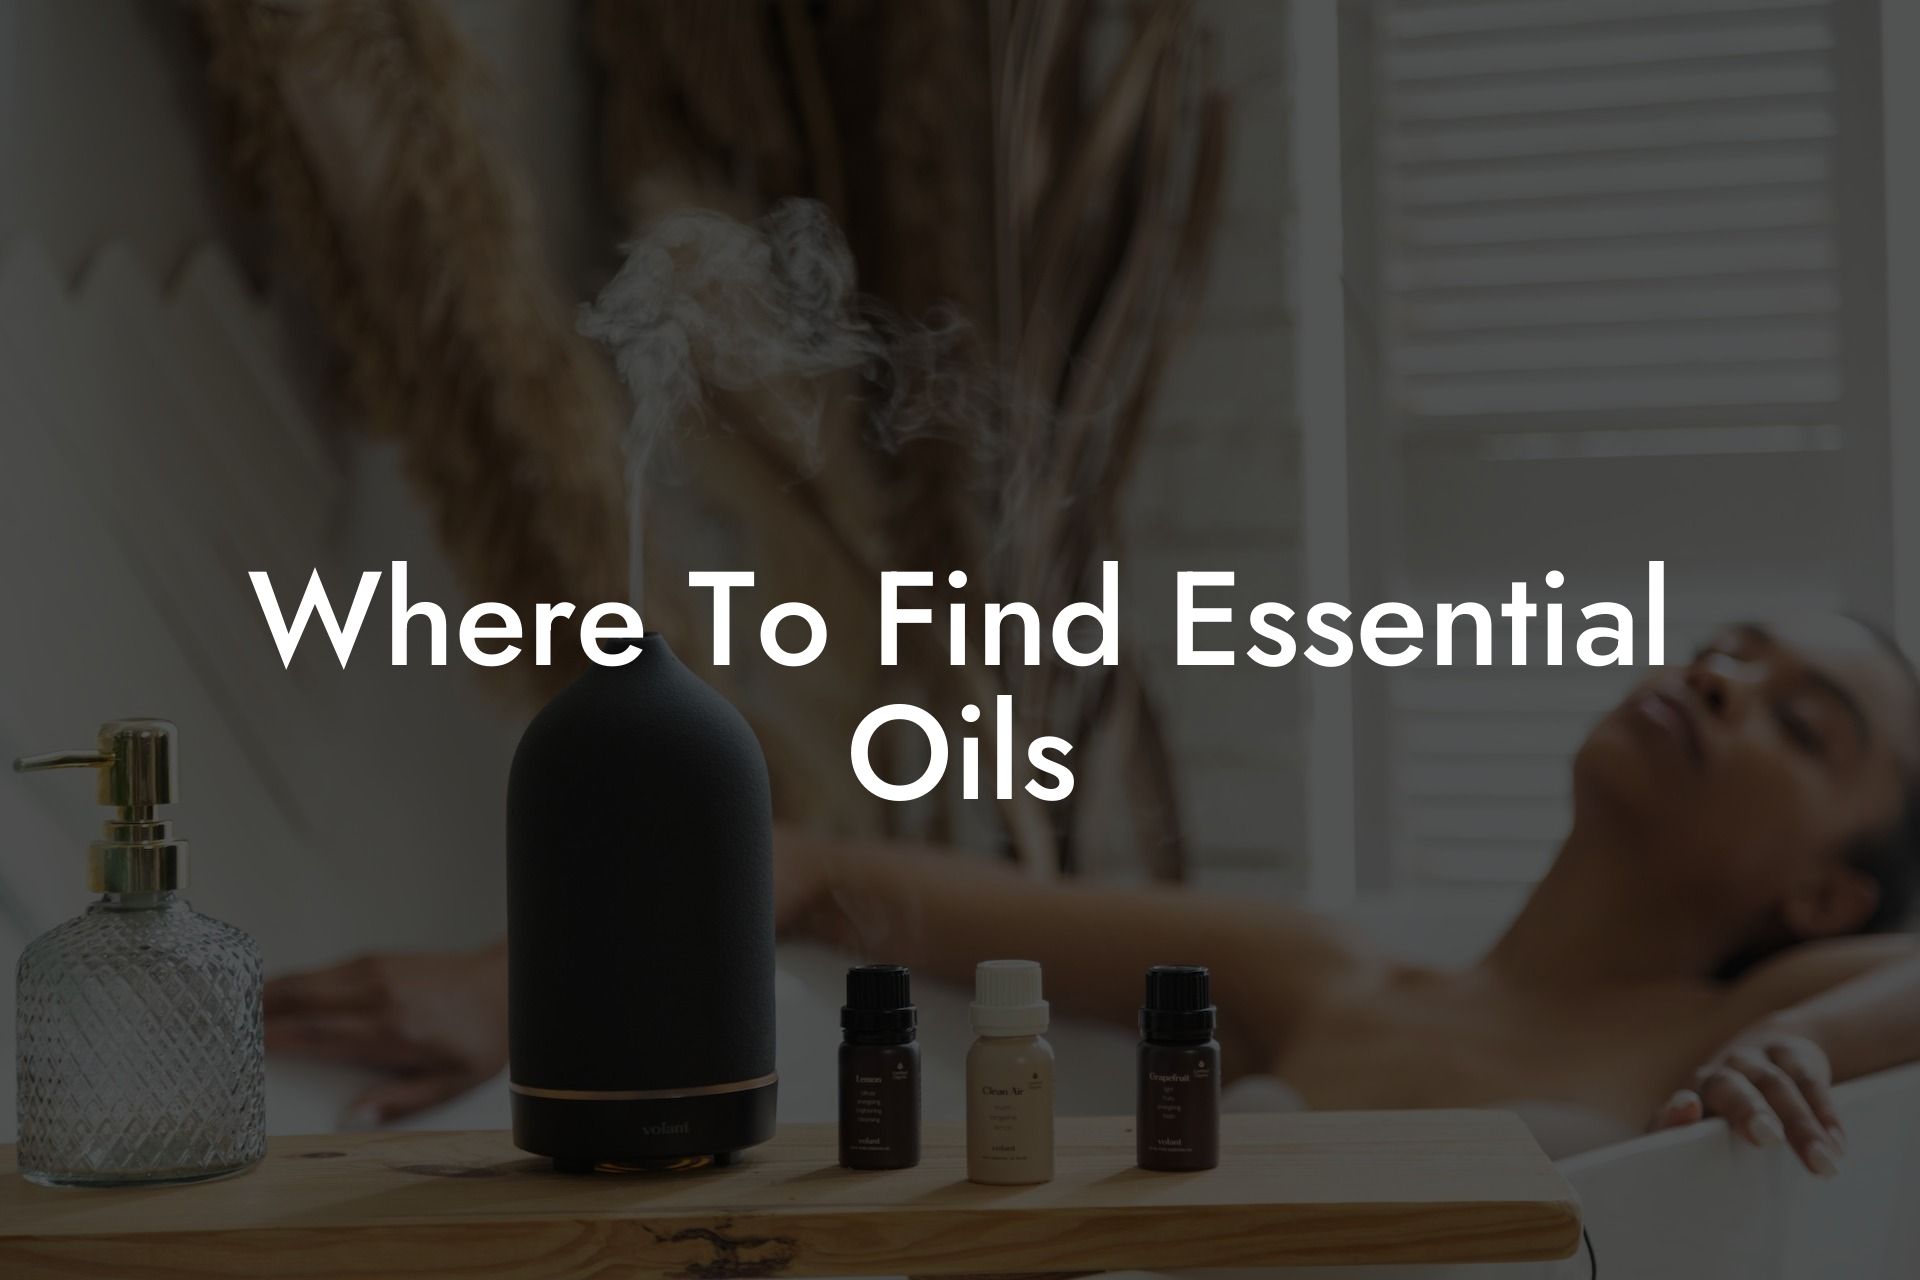 Where To Find Essential Oils